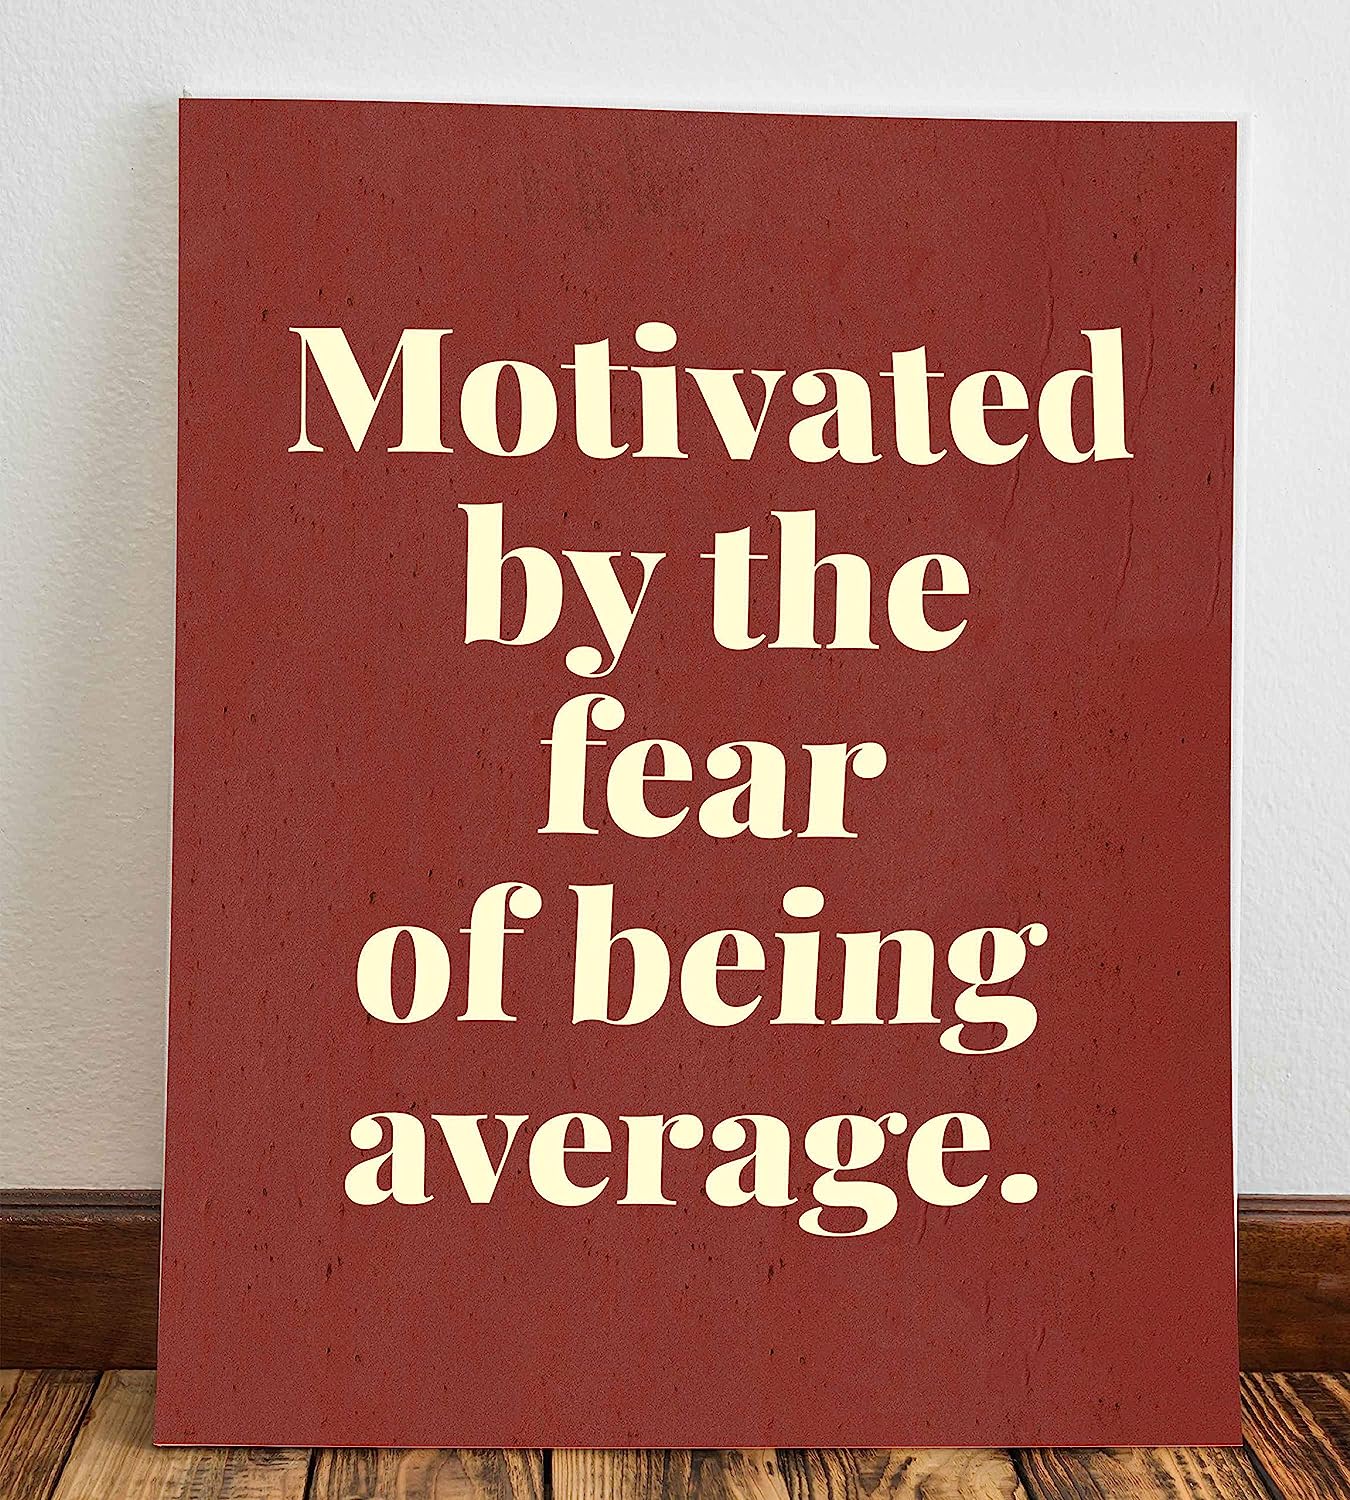 Motivated by the Fear of Being Average- Motivational Quotes Wall Art- 8 x 10" Typographic Poster Print-Ready to Frame. Ideal for Home-Office-School-Gym-Locker Room D?cor. Inspire Your Team!